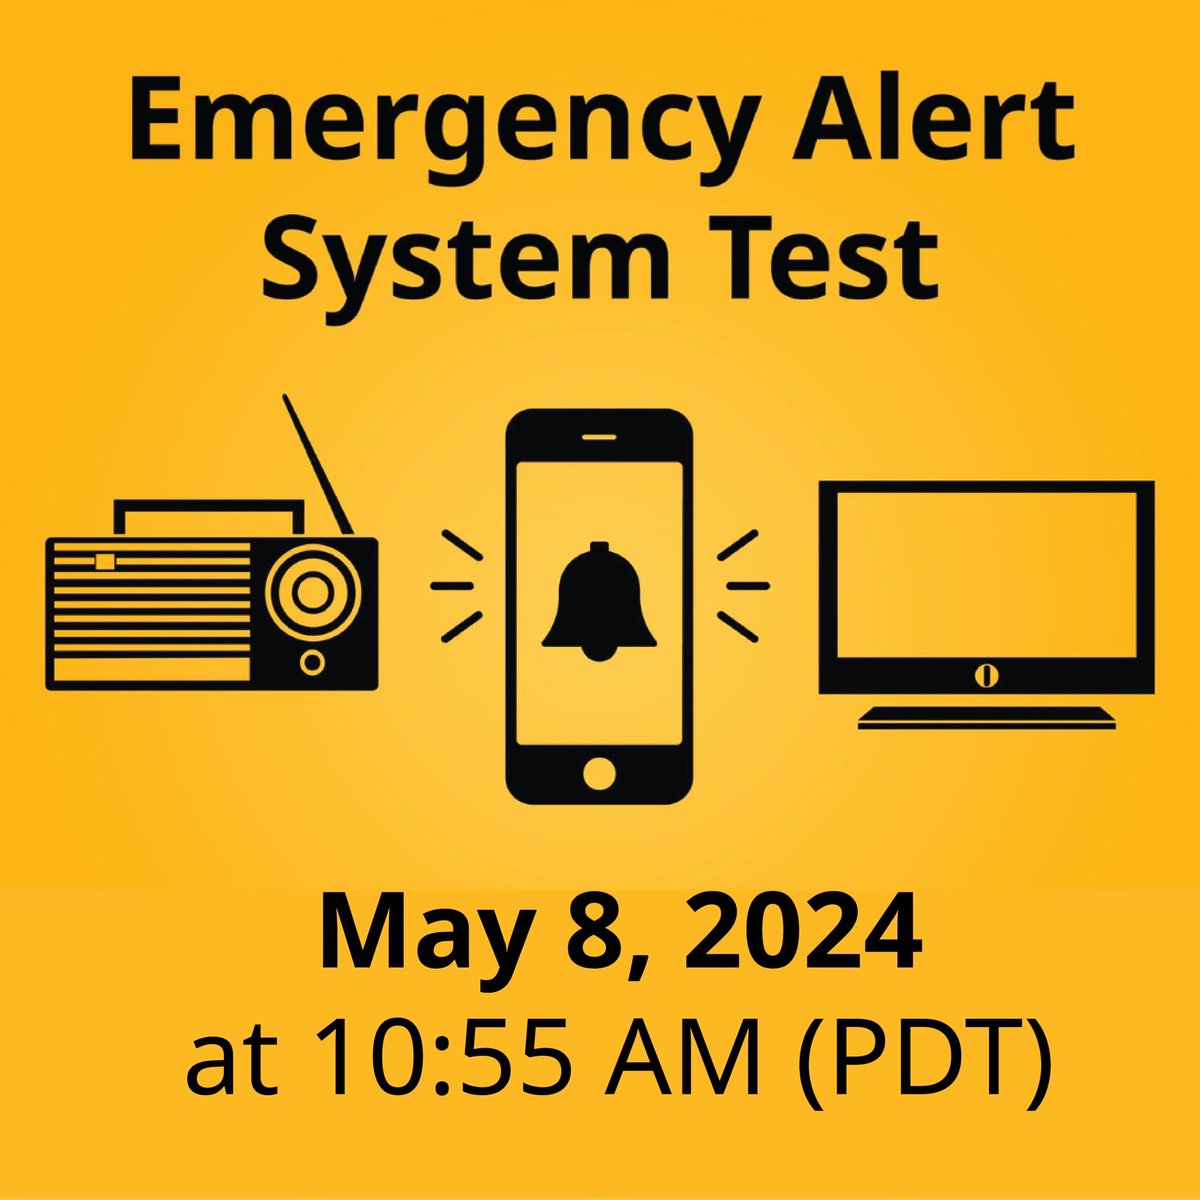 🚨⚠️🚨 An emergency alert *test* will be issued tomorrow at 10:55 am! The test alert will go to all compatible cellphones, and will interrupt radio and television broadcasts. @PreparedBC @EmergencyInfoBC Learn more: news.gov.bc.ca/releases/2024E…